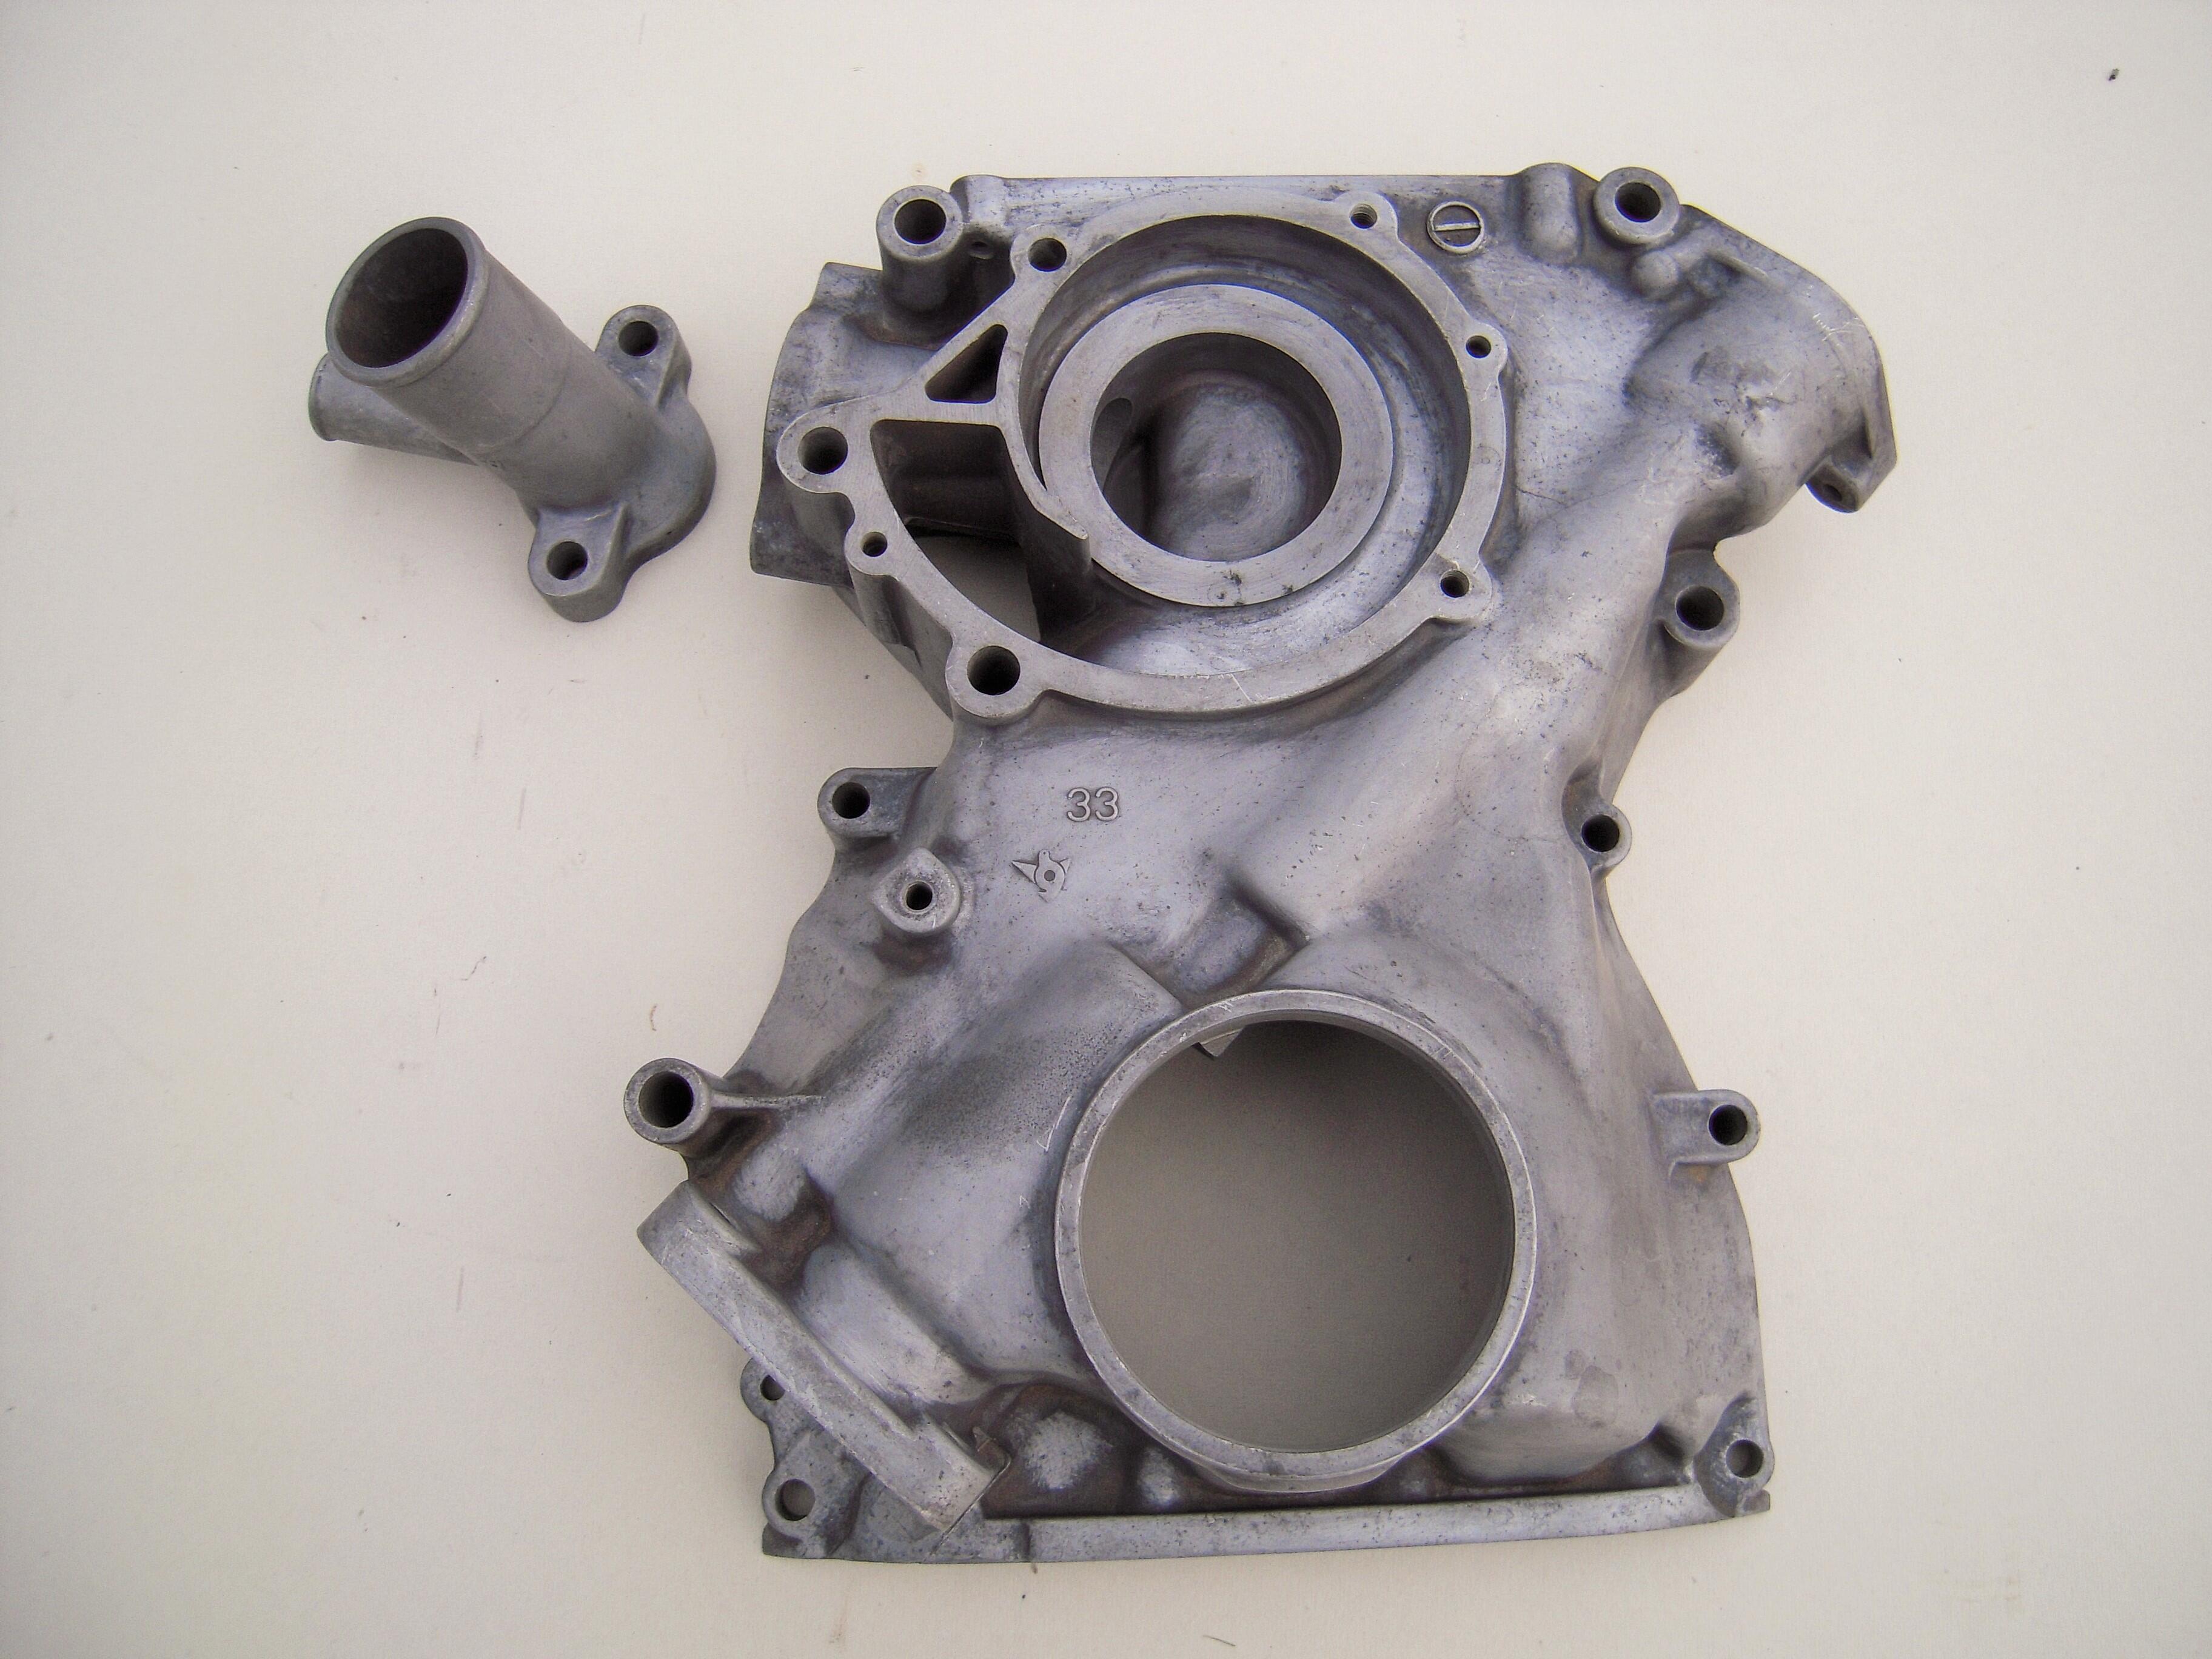 Datsun Z Front Engine Cover w/ Radiator Hose Fitting